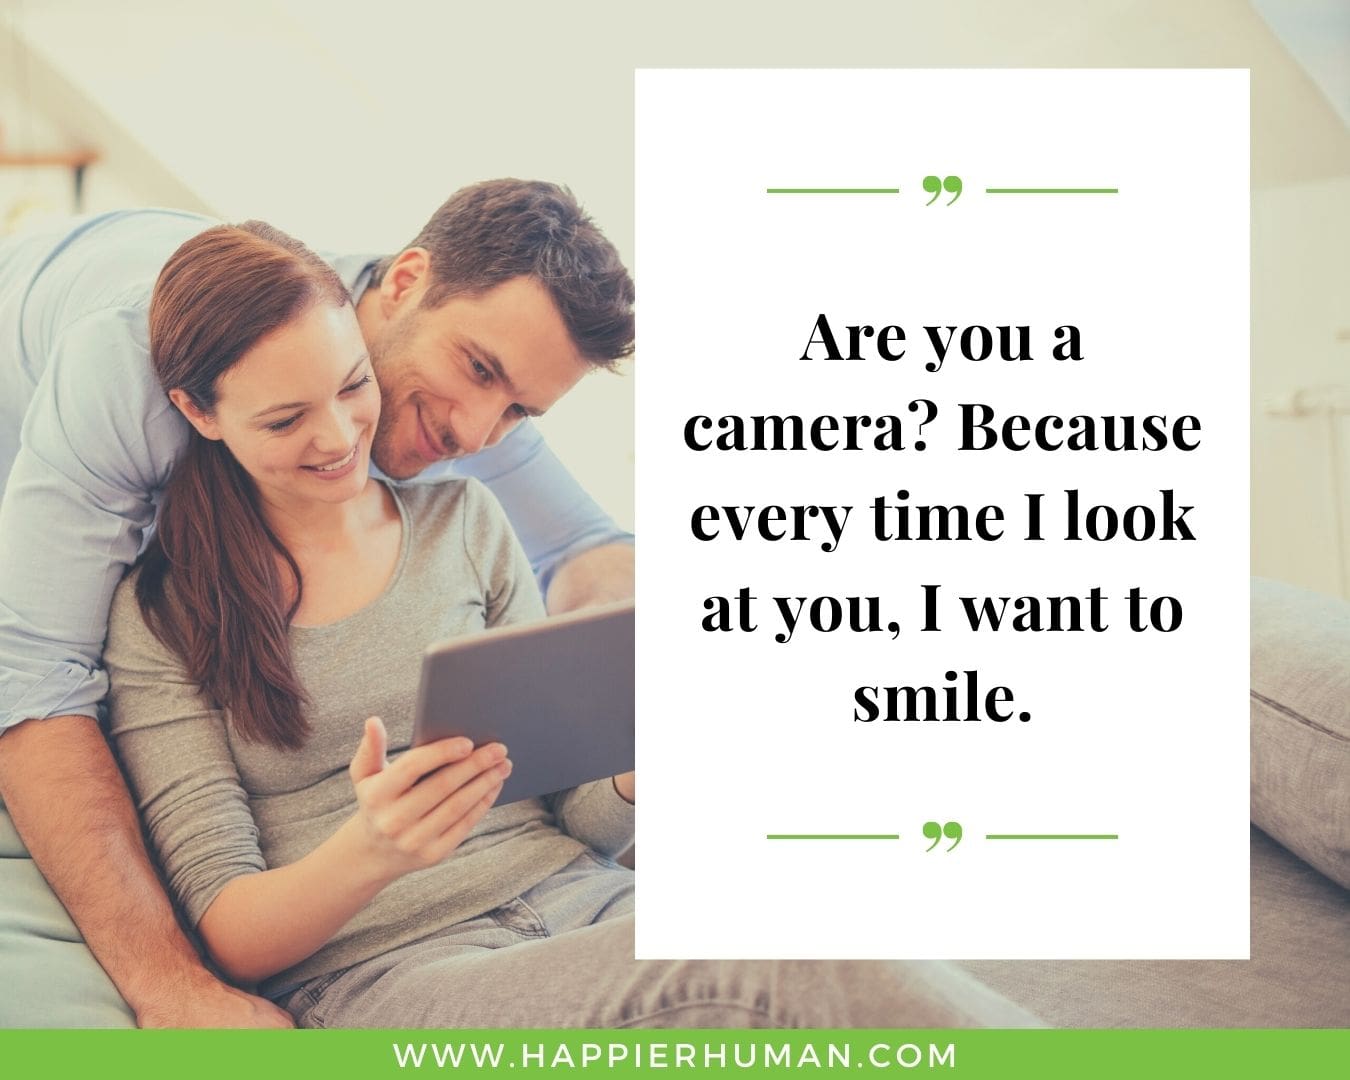 Deeply in love quotes for relationships- “Are you a camera? Because every time I look at you, I want to smile.”